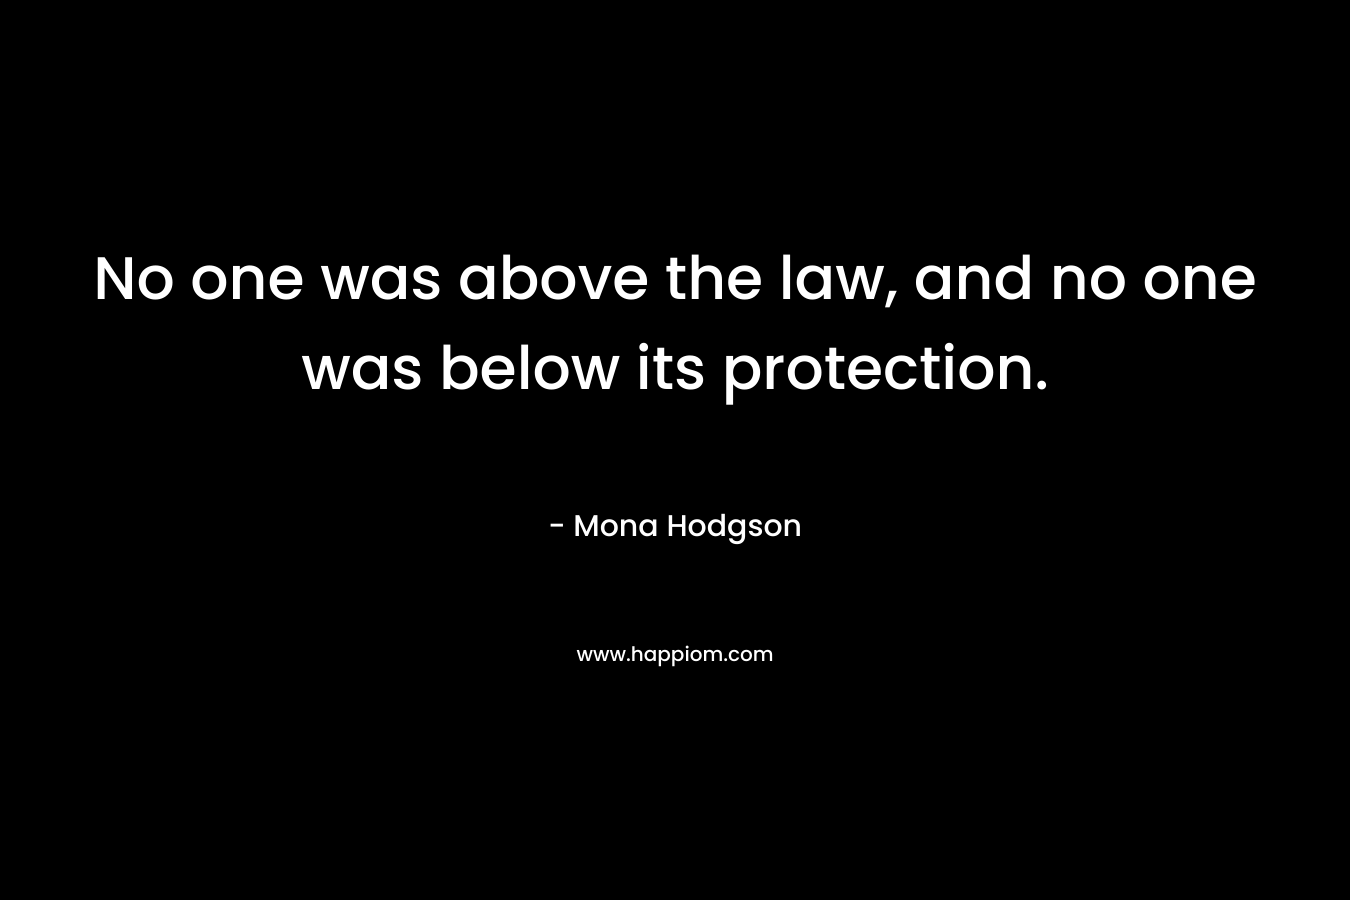 No one was above the law, and no one was below its protection. – Mona Hodgson